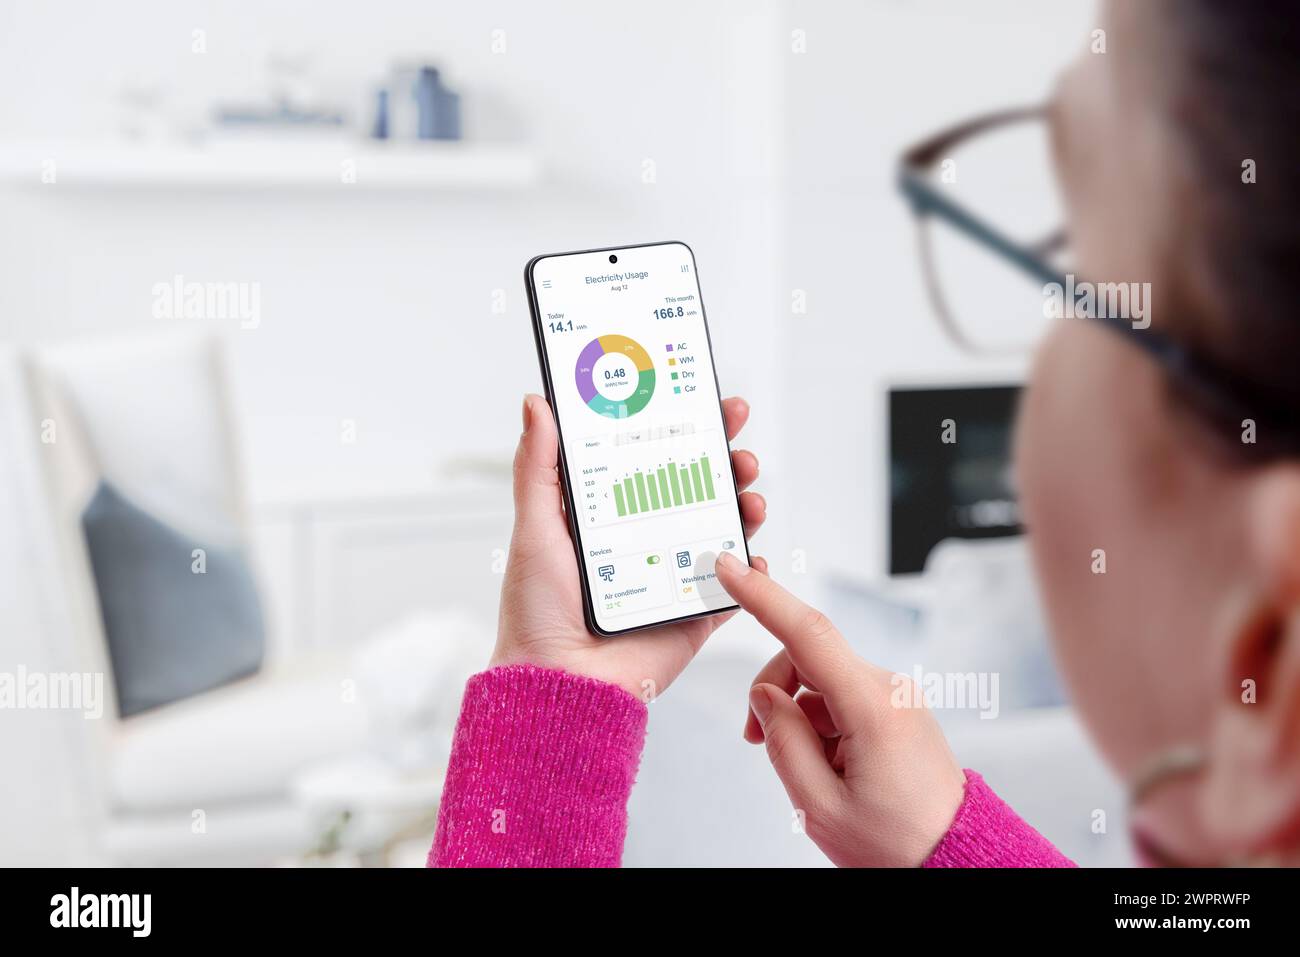 Woman uses electricity usage app for consumption monitoring and analysis in living room. Concept of energy management and smart living Stock Photo